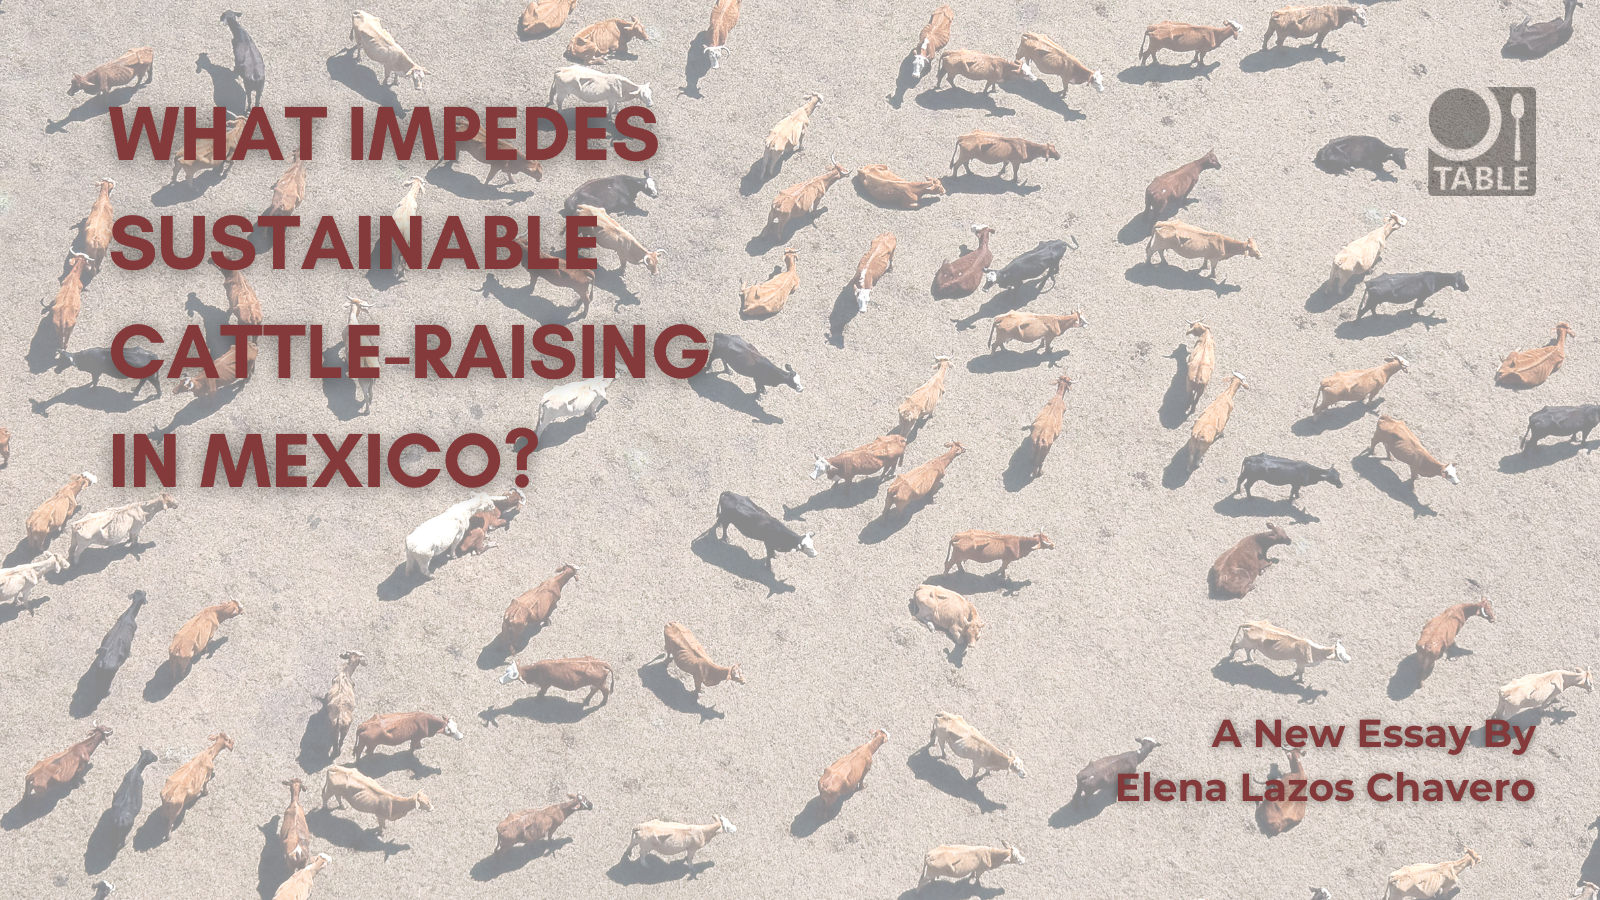 A flyer for the essay by Elena Lazos Chavero on sustainable cattle-raising in Mexico.